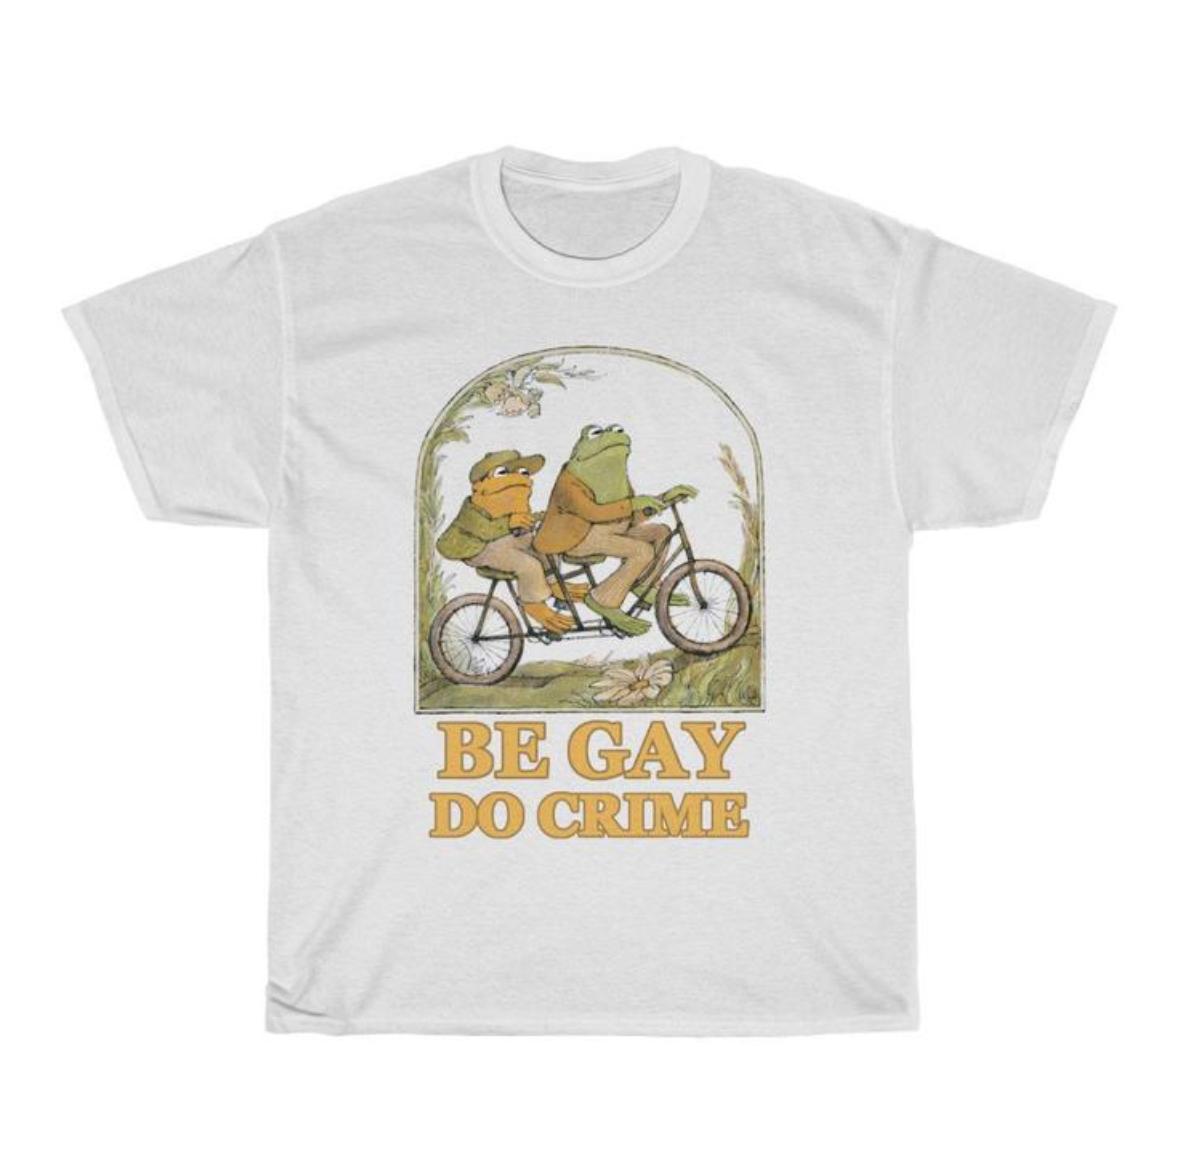 Be Gay Do Crime Tee by White Market